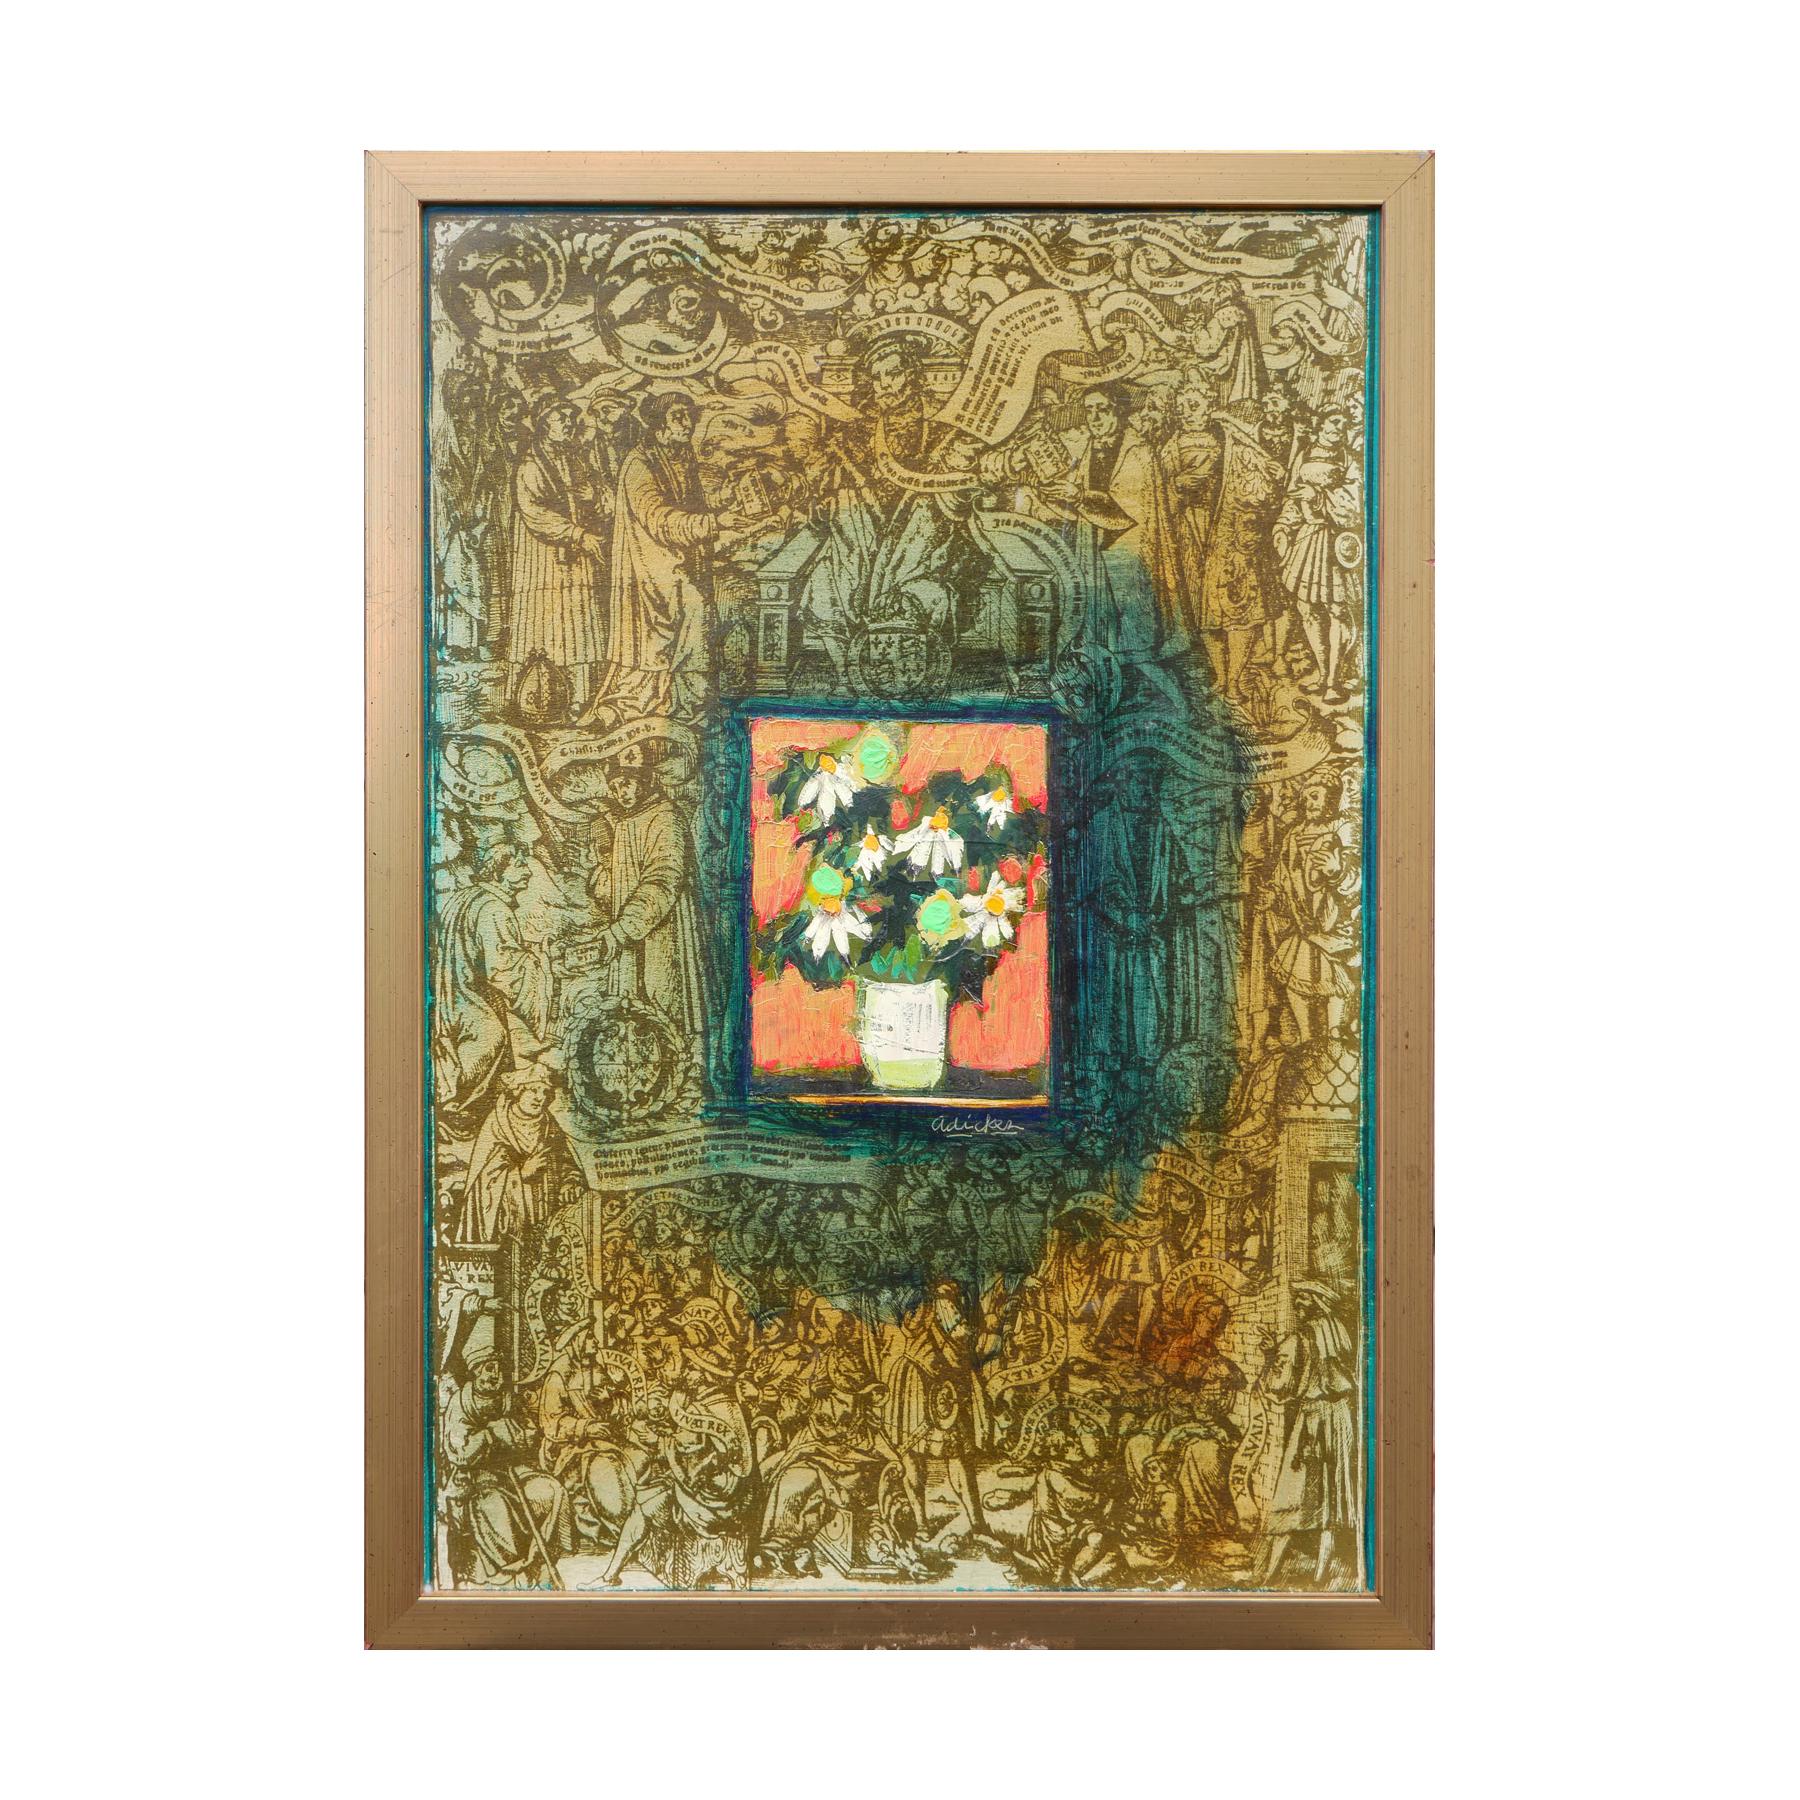 Green-toned modern abstract still life painting by Houston, TX artist David Adickes. The painting depicts a central still-life scene with white daisies in a vase against an orange background. This central subject glows in green and rests against